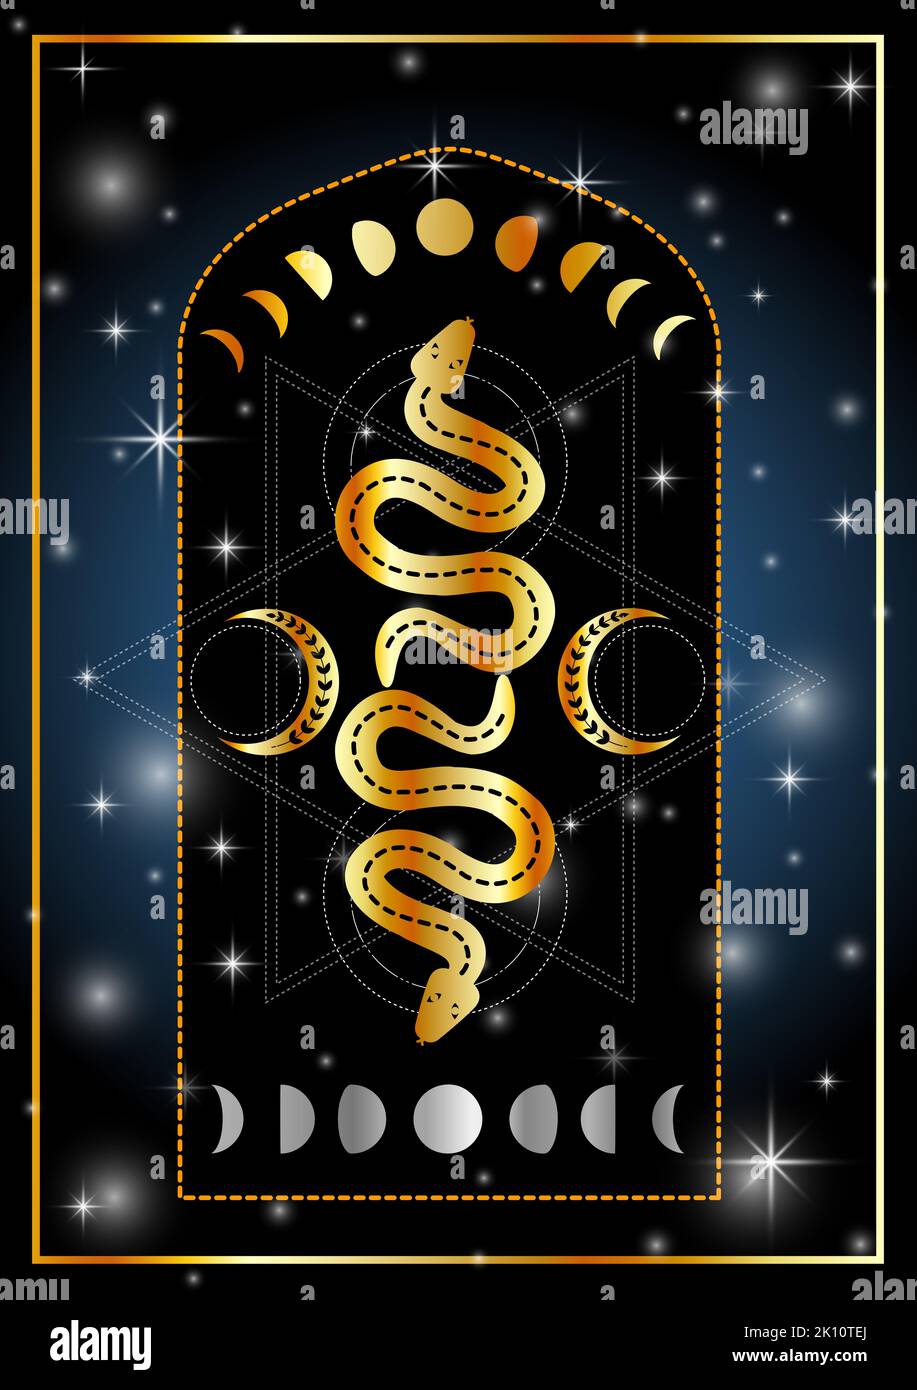 Golden occult magick snakes triple goddess fertility symbol with moon phases Stock Photo